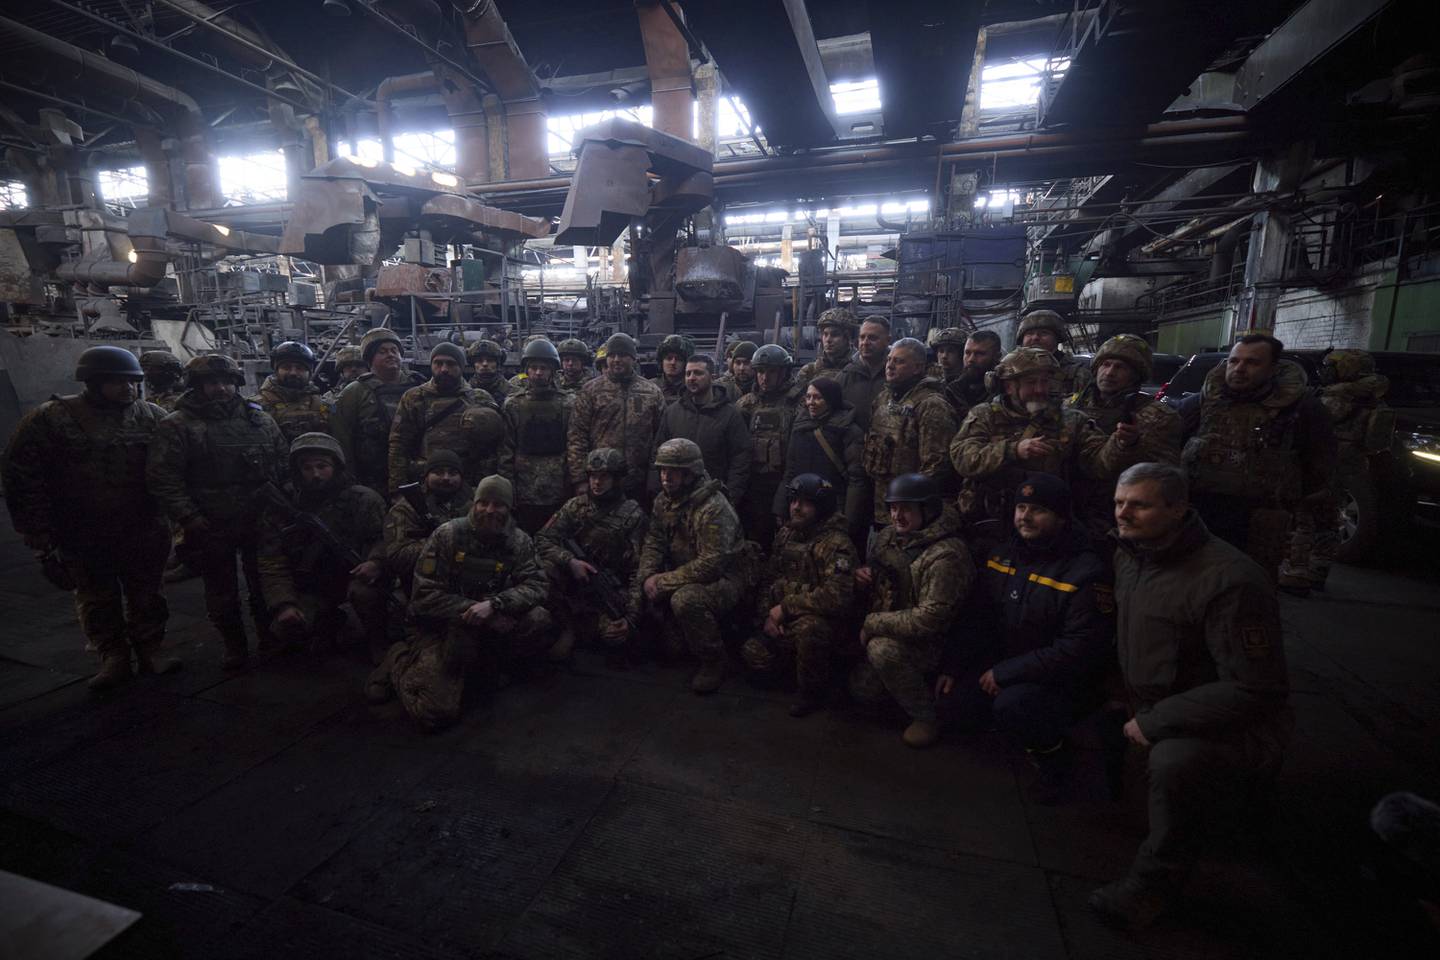 Ukrainian President Volodymyr Zelenskyy poses with soldiers at Bakhmut, Ukraine, on Tuesday. AP